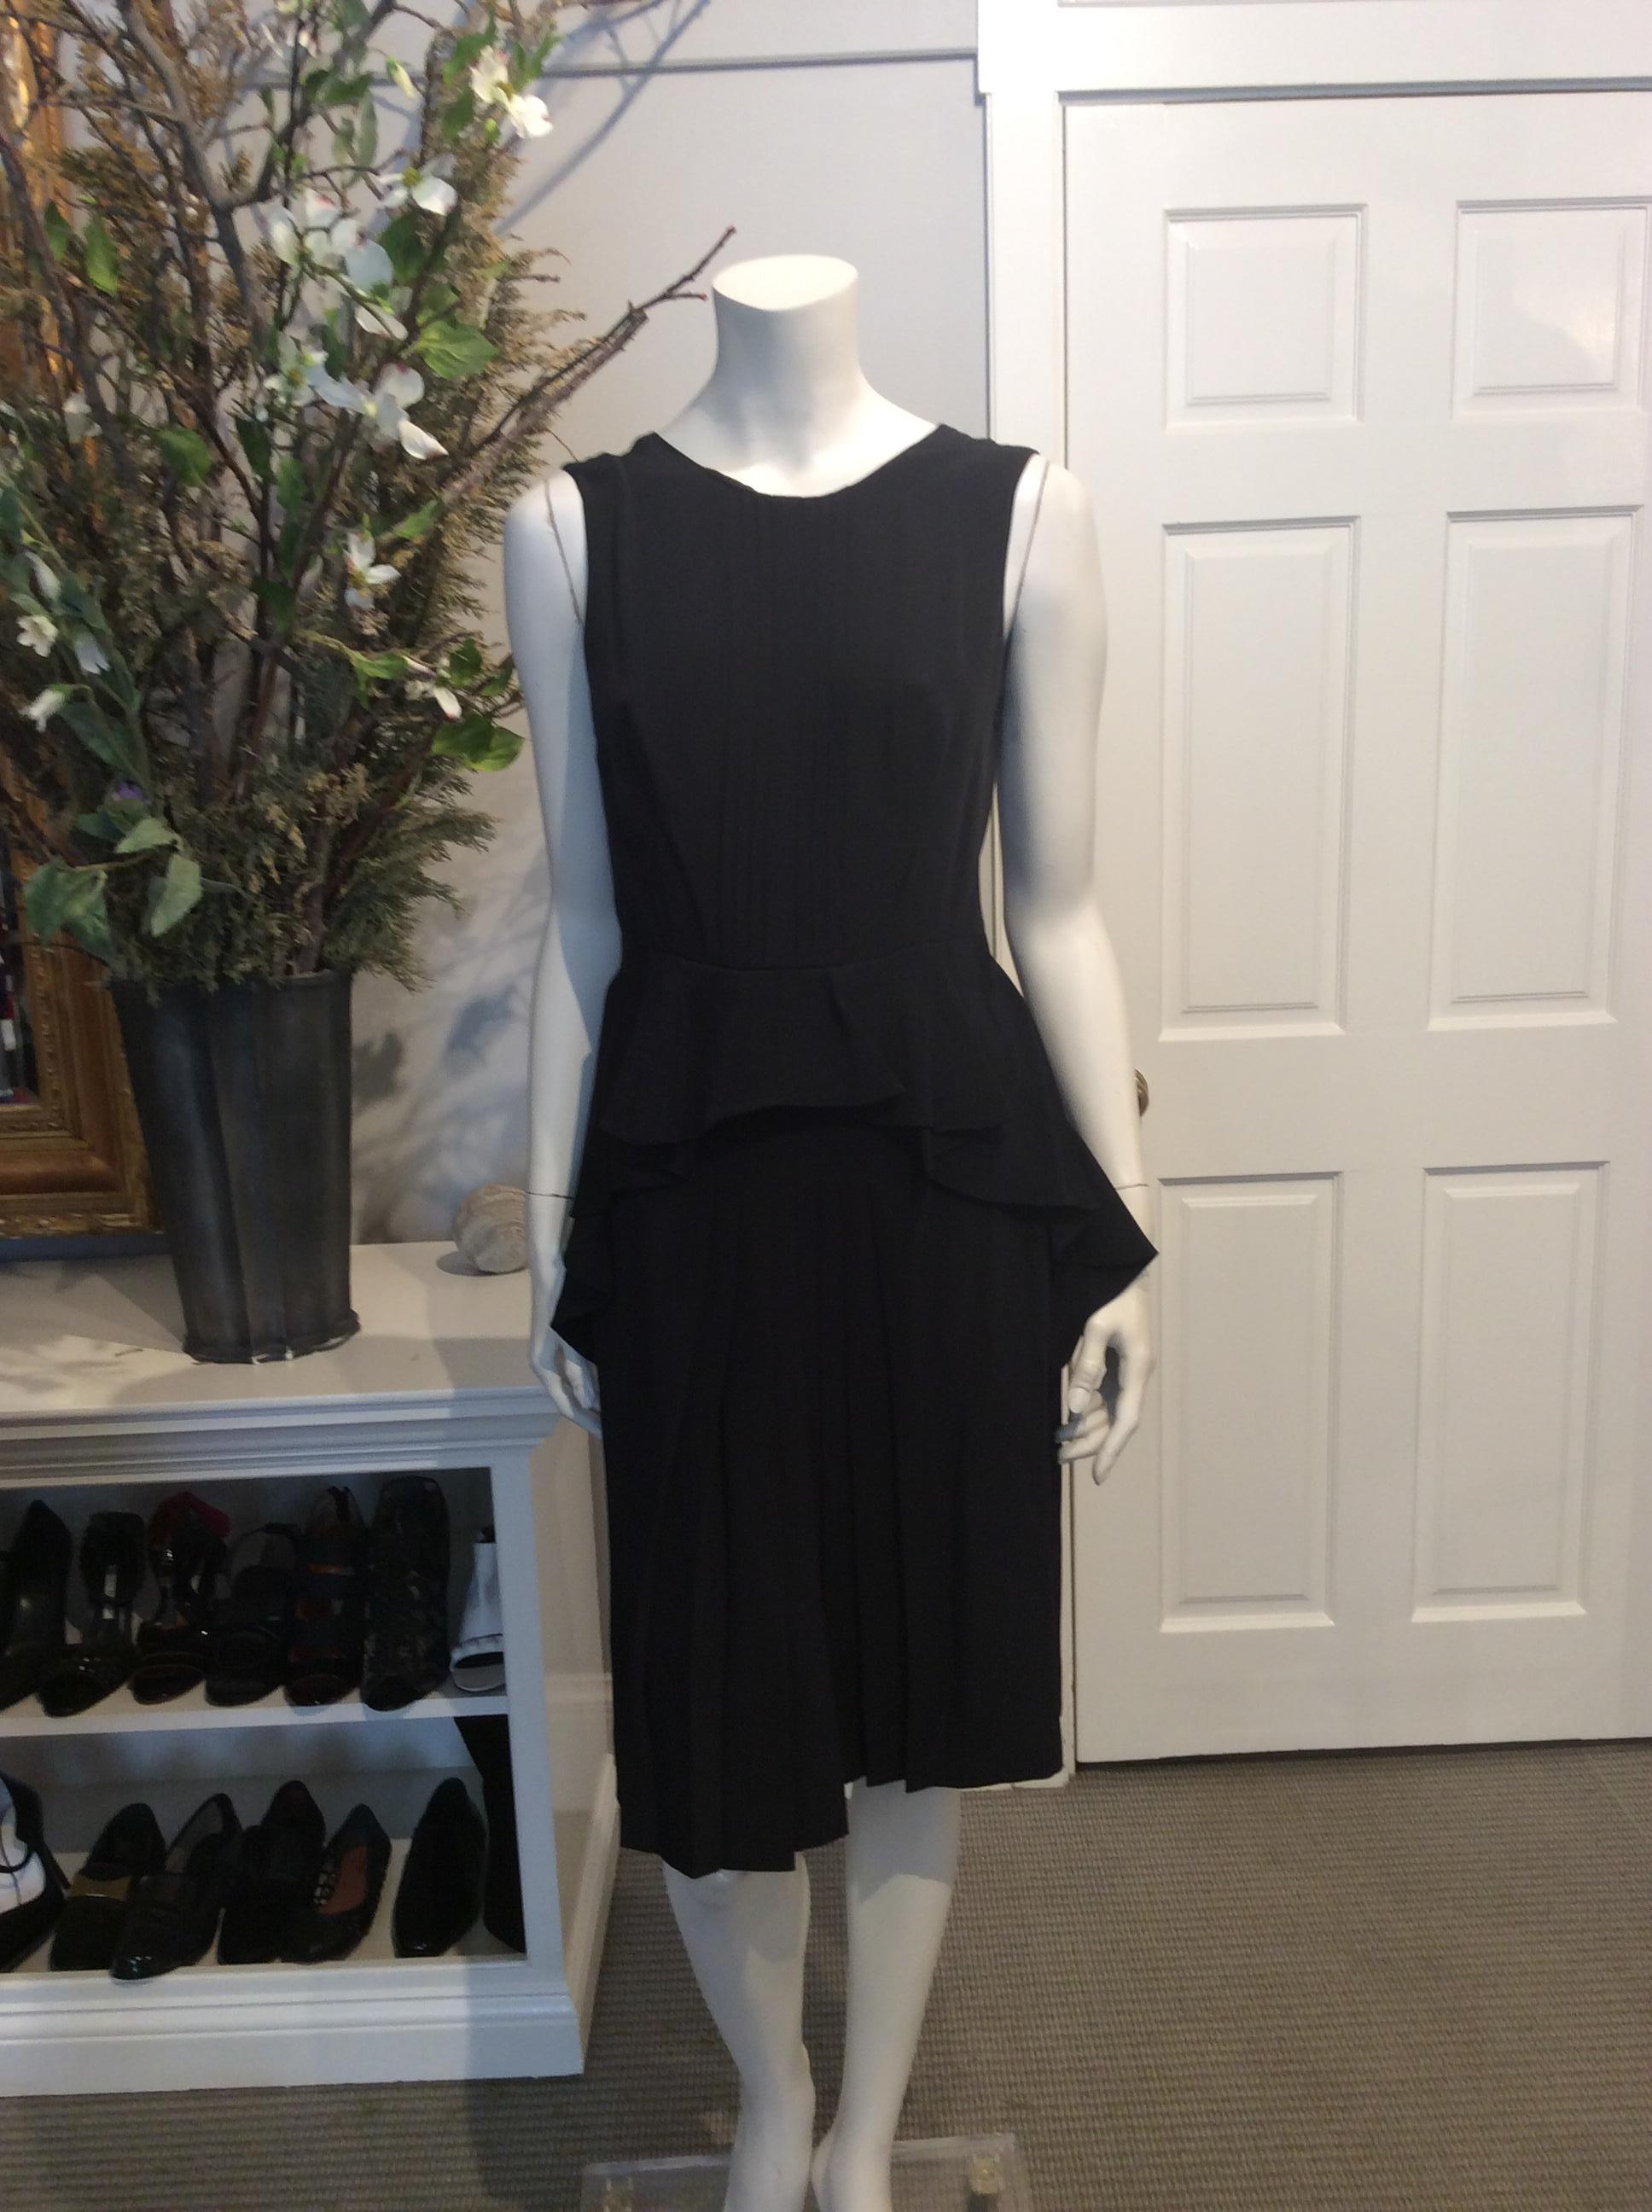 Black Prada silk dress with pleating down the front and skirt. Draped silk at hips. Open draping at upper back of dress. Zippered closure along the left hand side of garment with single hook and eye. Dress is new with tags.

Sizing: It42,